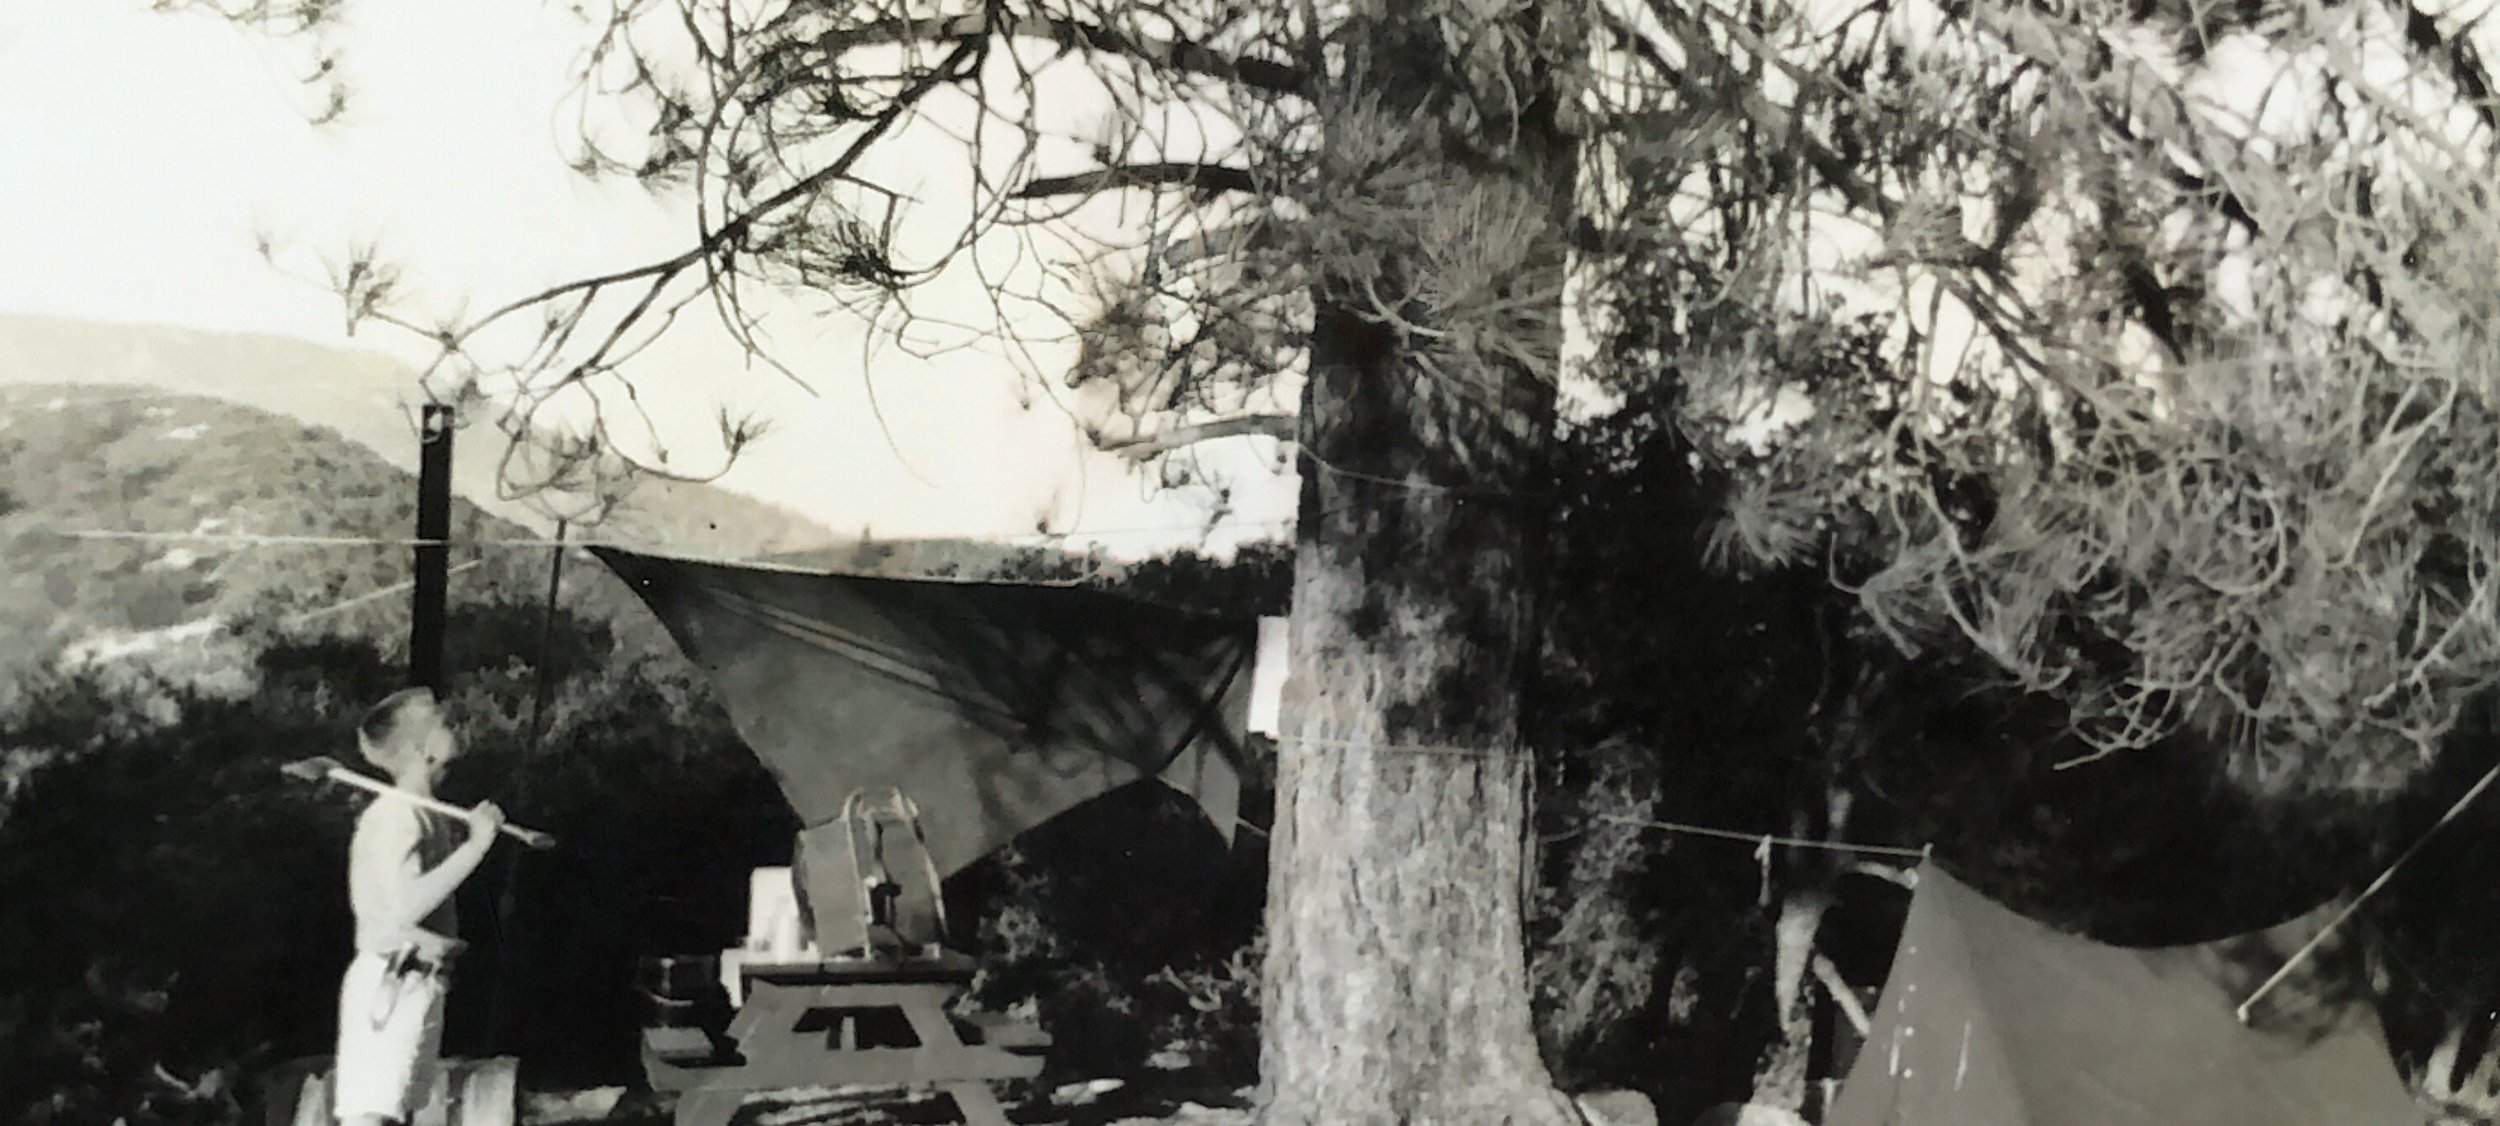  Early 1940s  Probably a “gag” photo made by Bob’s father or his brother, Bill. Bob seems to be contemplating chopping down this large tree with his axe while on a camping trip. Location: Perhaps San Gabriel Mountains near Pasadena. The Robins Family